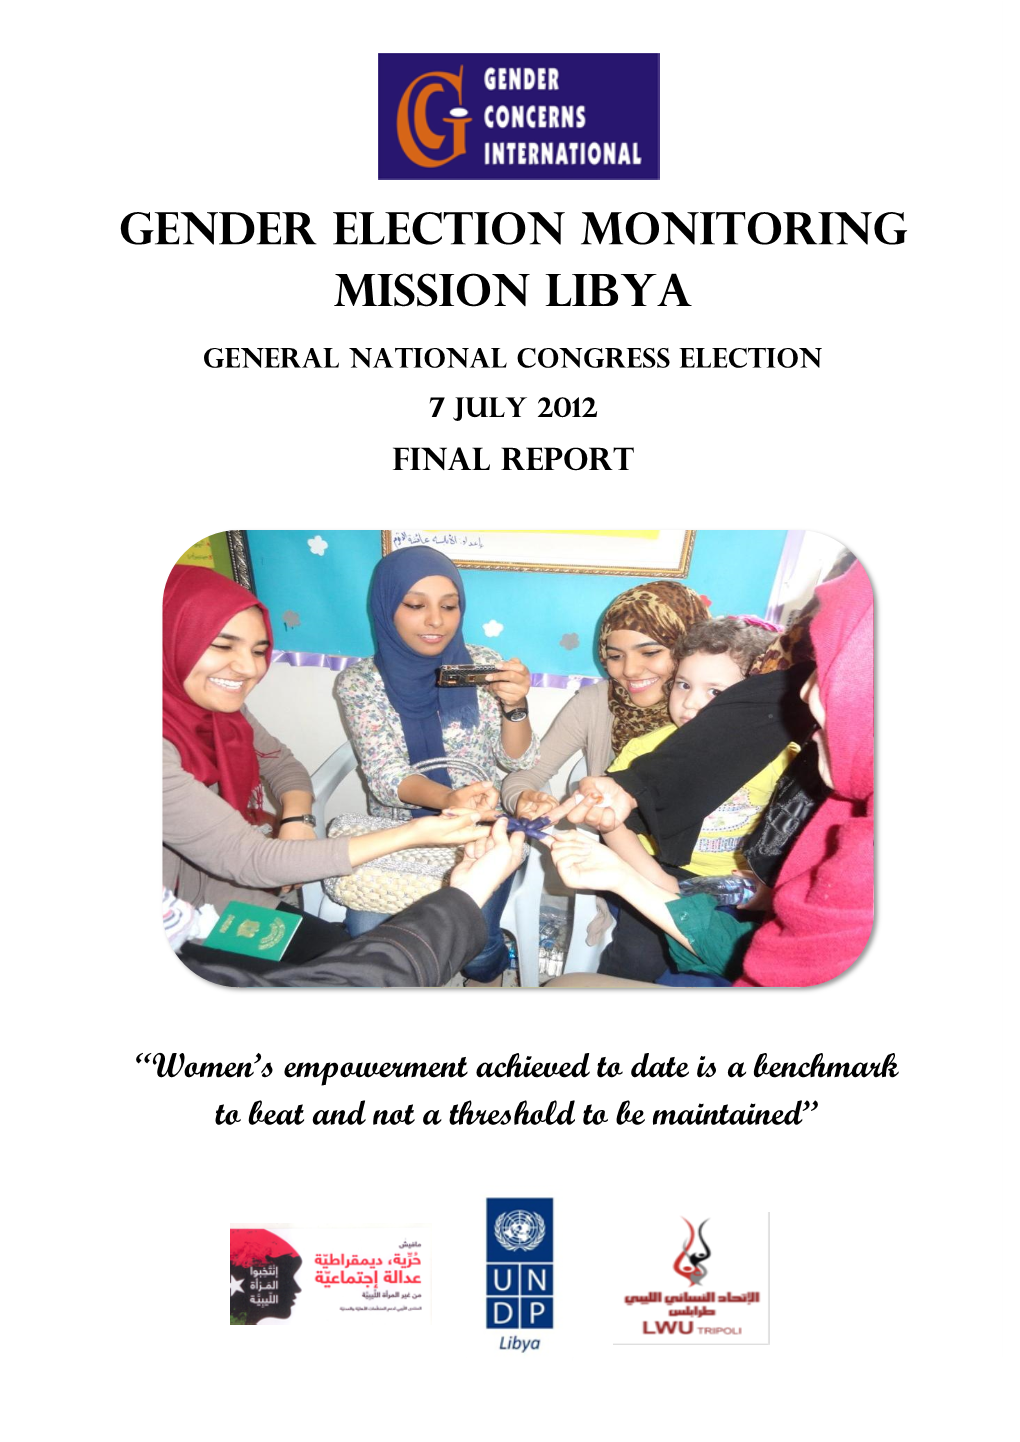 Gender Election Monitoring Mission Libya and Analysis Are Explained in Detail in This Report